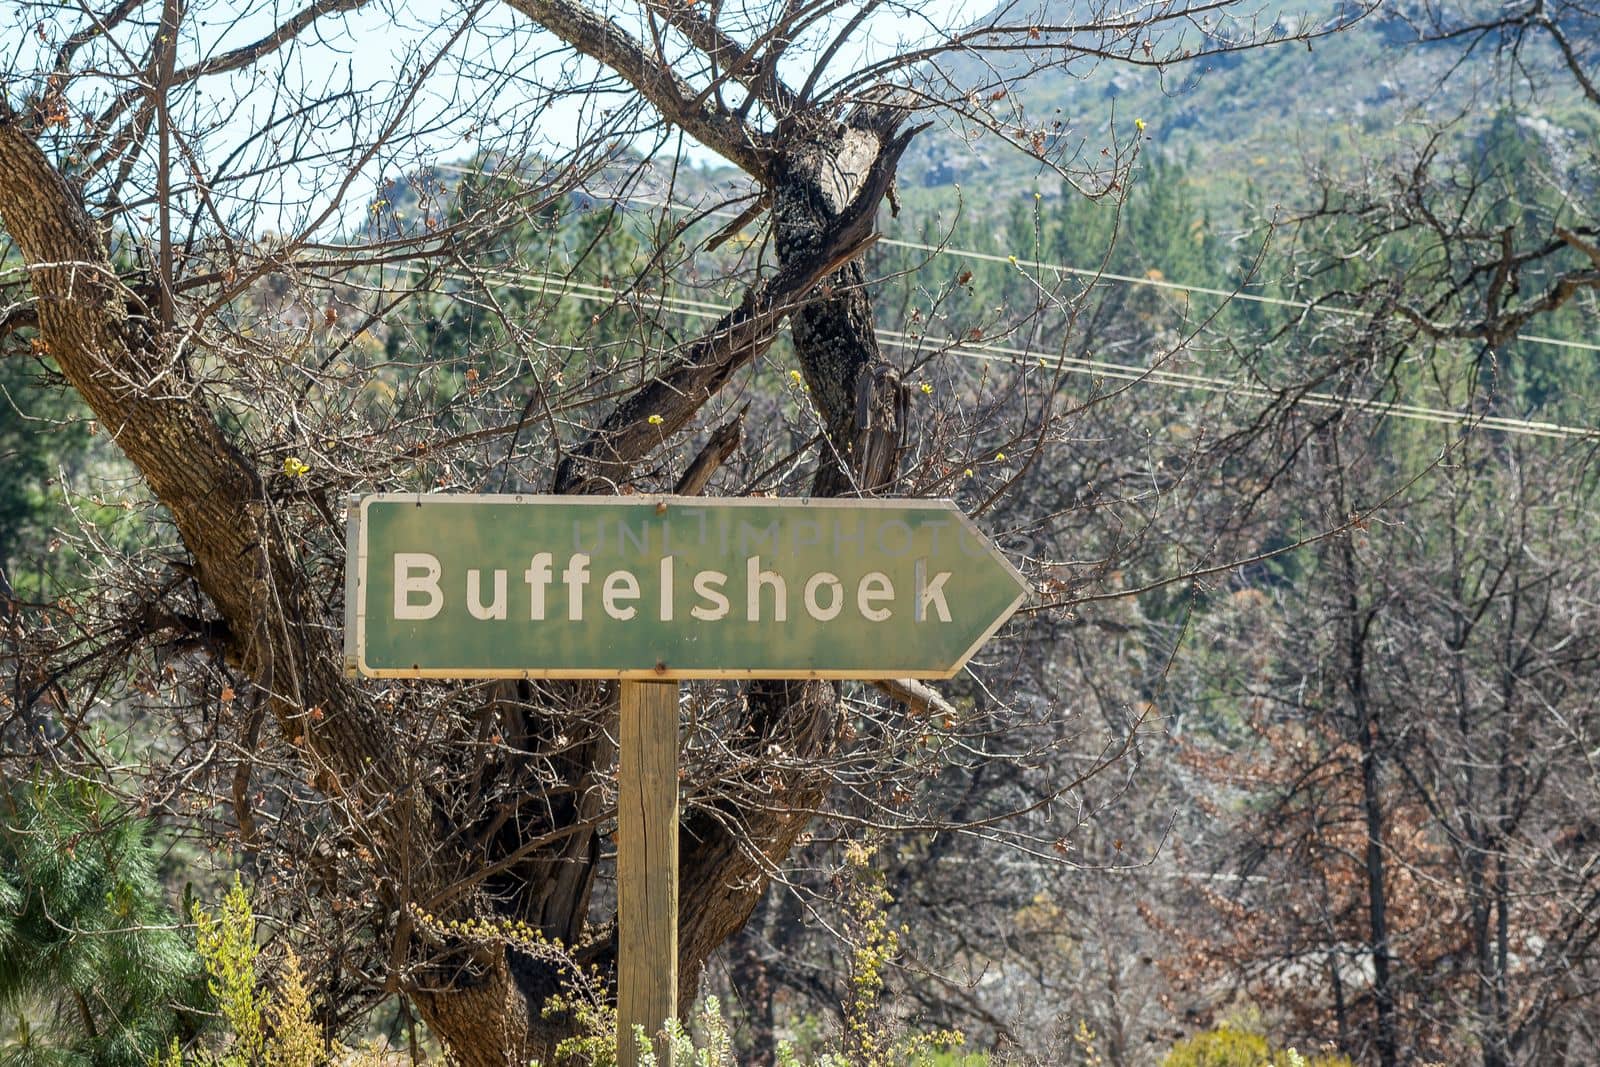 A directional sign at Buffelshoek on road R303 in the Koue Bokkeveld region of the Western Cape Province